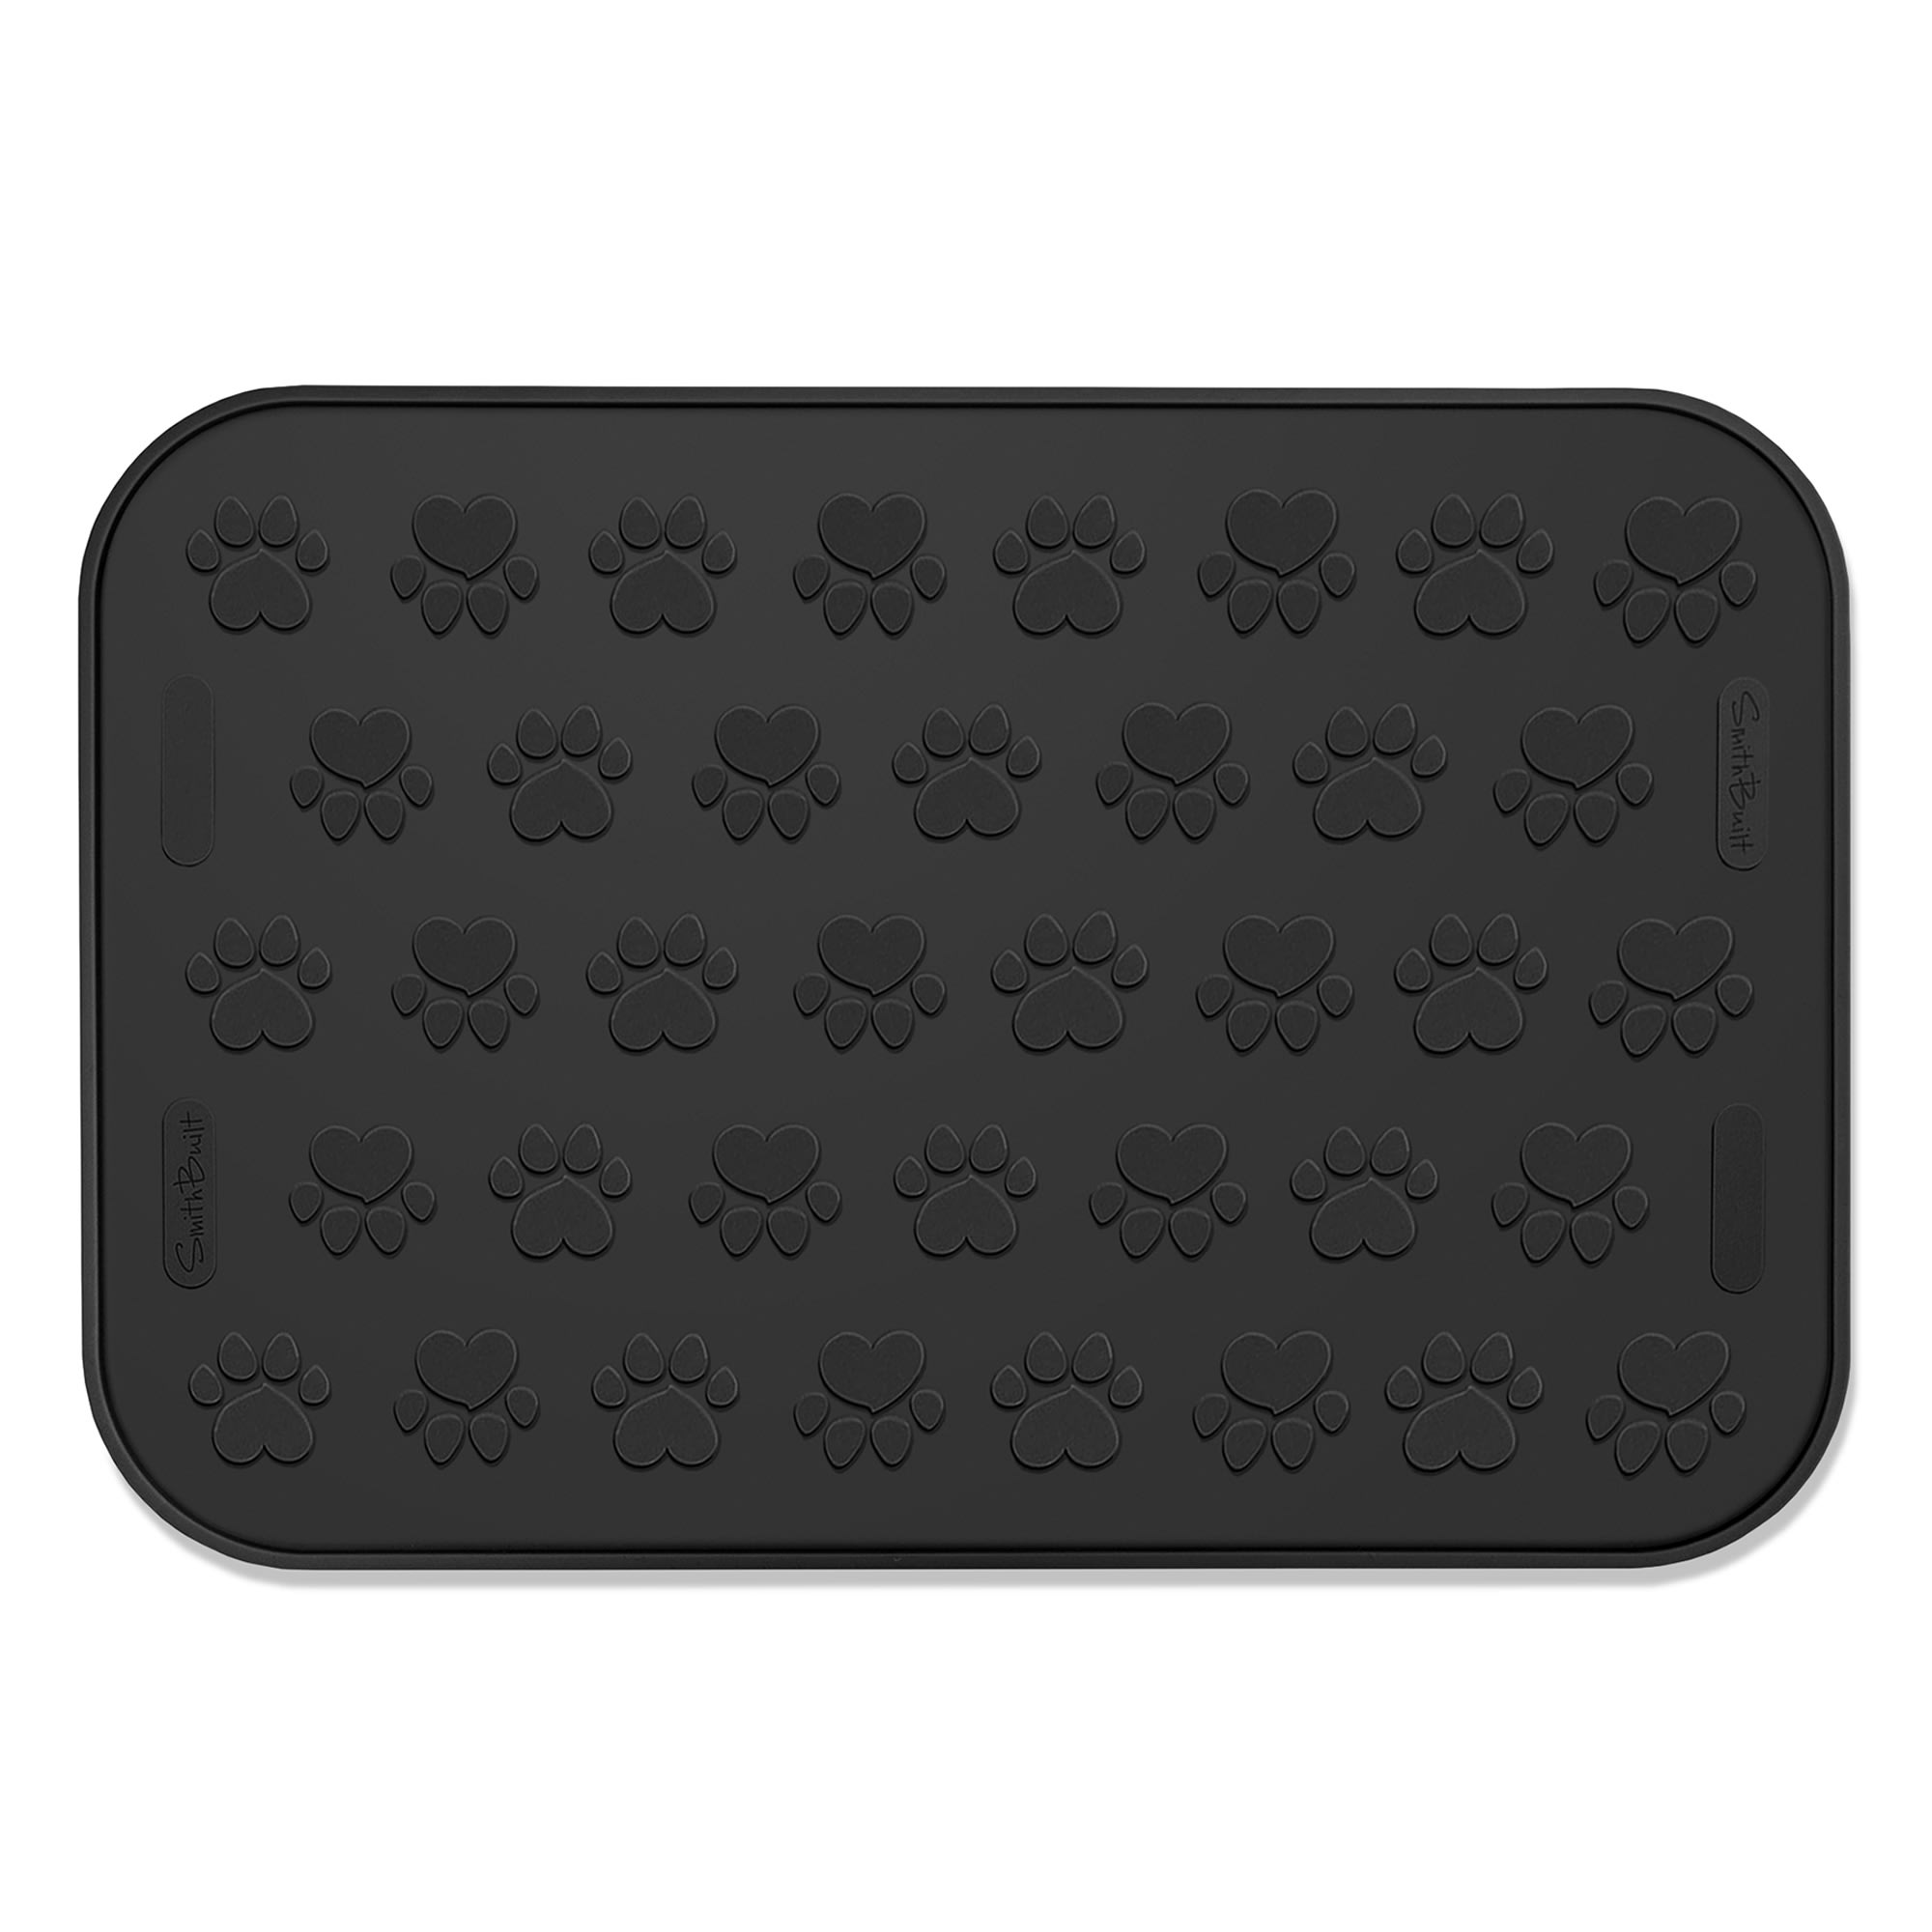 Dog Mat for Food and Water 2 Pieces Bone Shape Dog Mats Non-Slip PET  Feeding Mat for Under Dog Bowls Embroidered Microfiber PET Bowl Mat Water